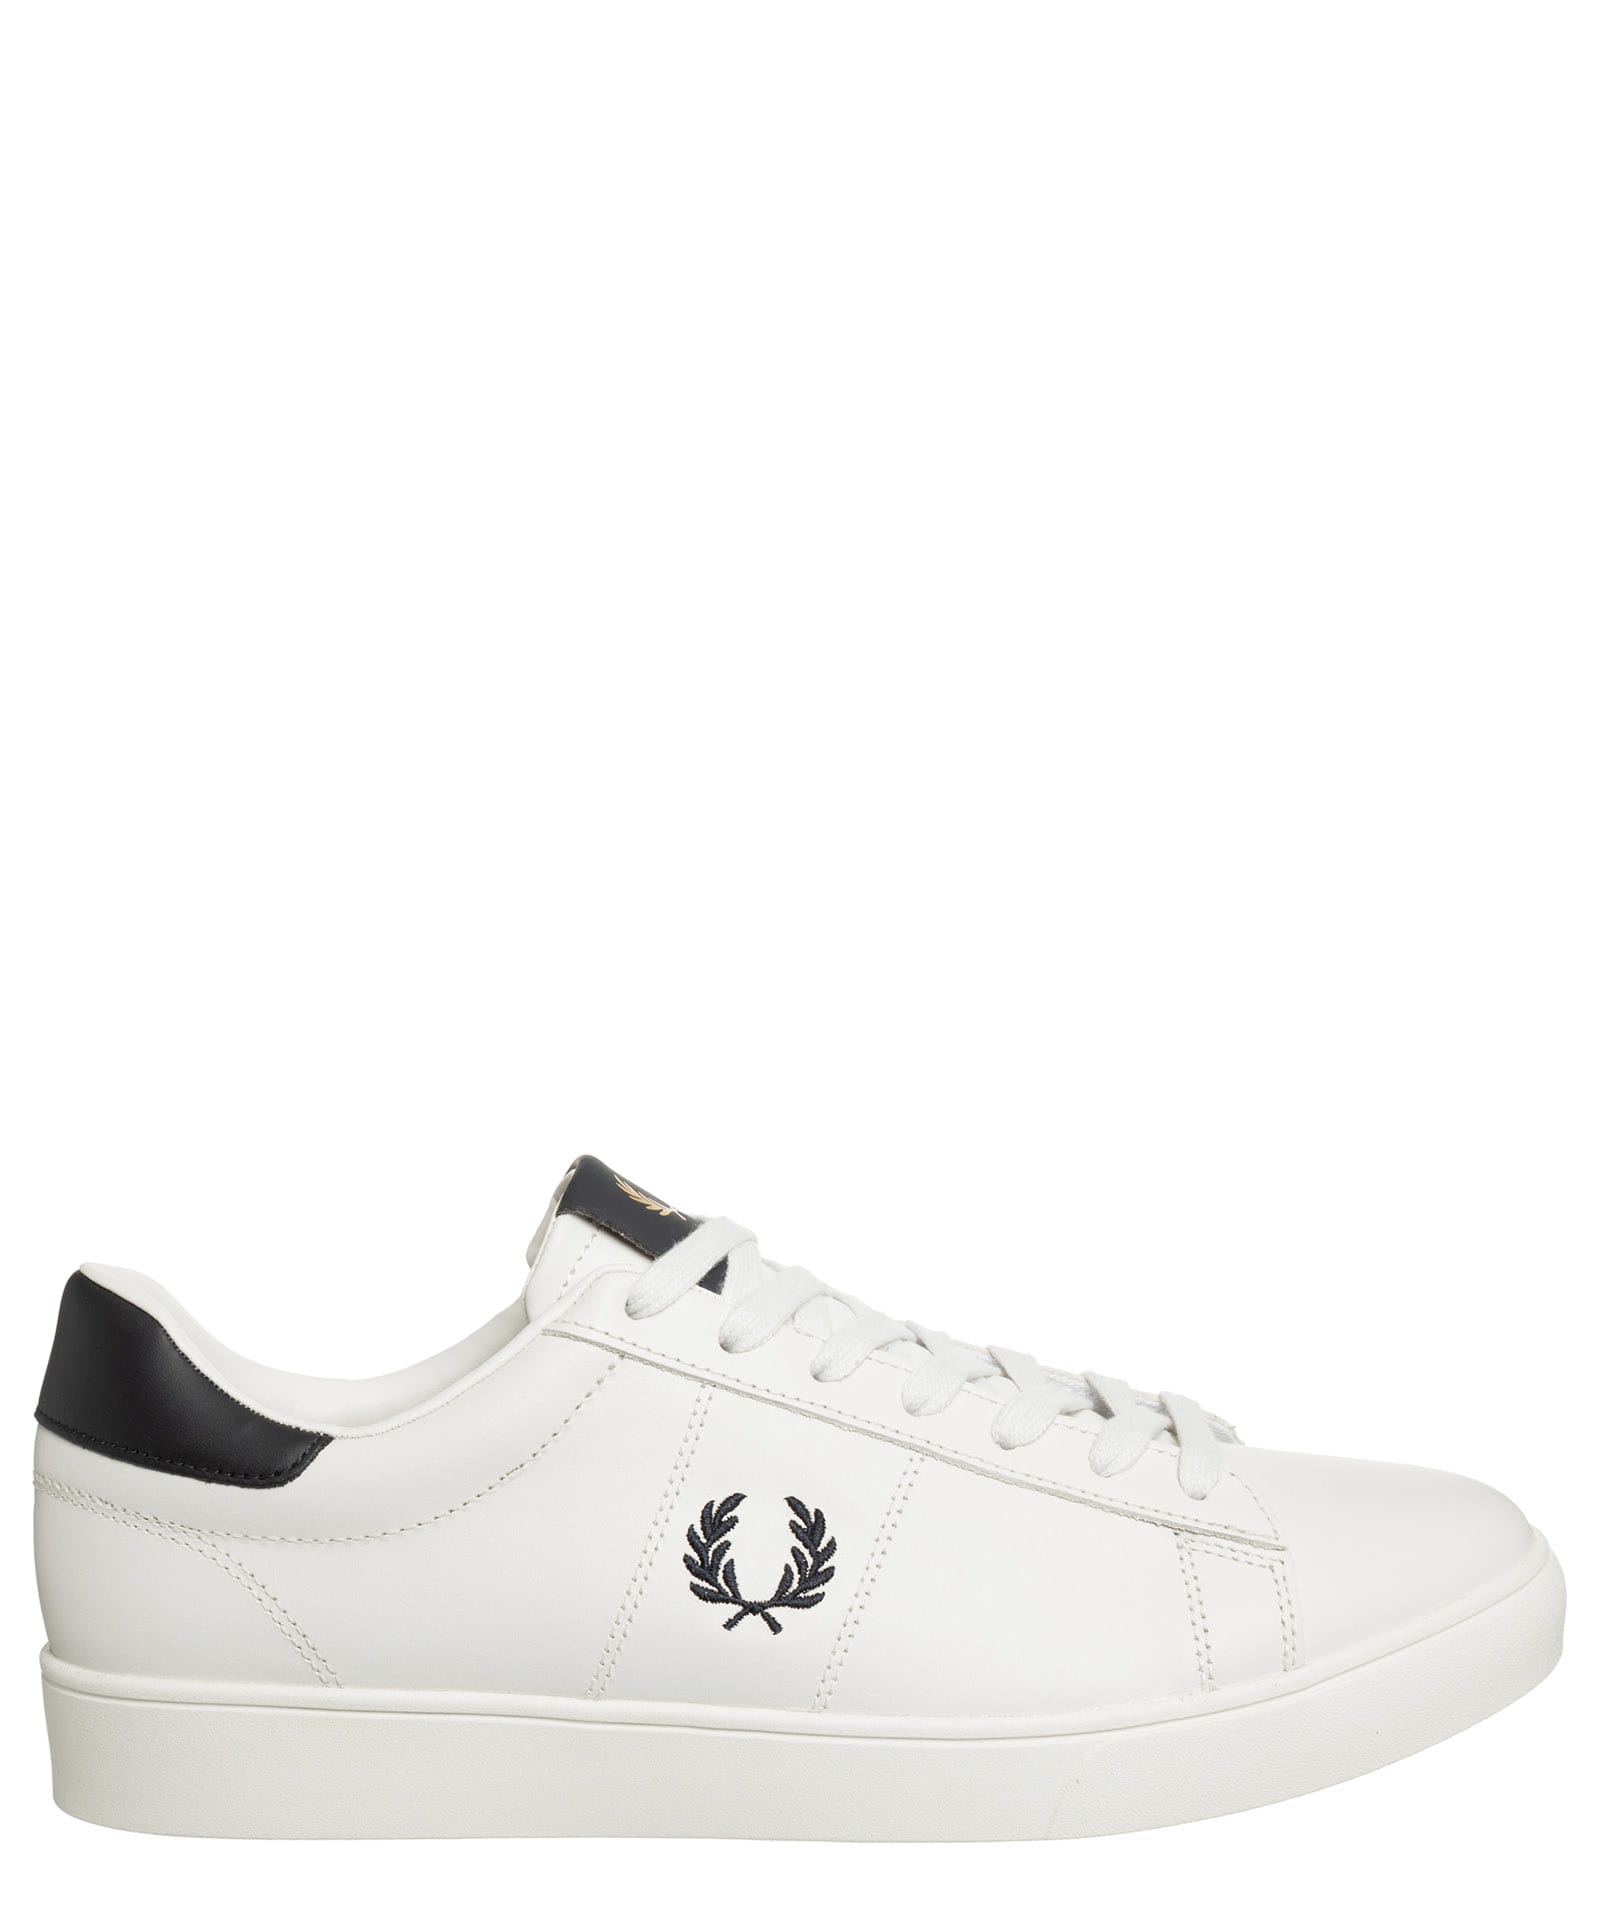 FRED PERRY SPENCER LEATHER SNEAKERS